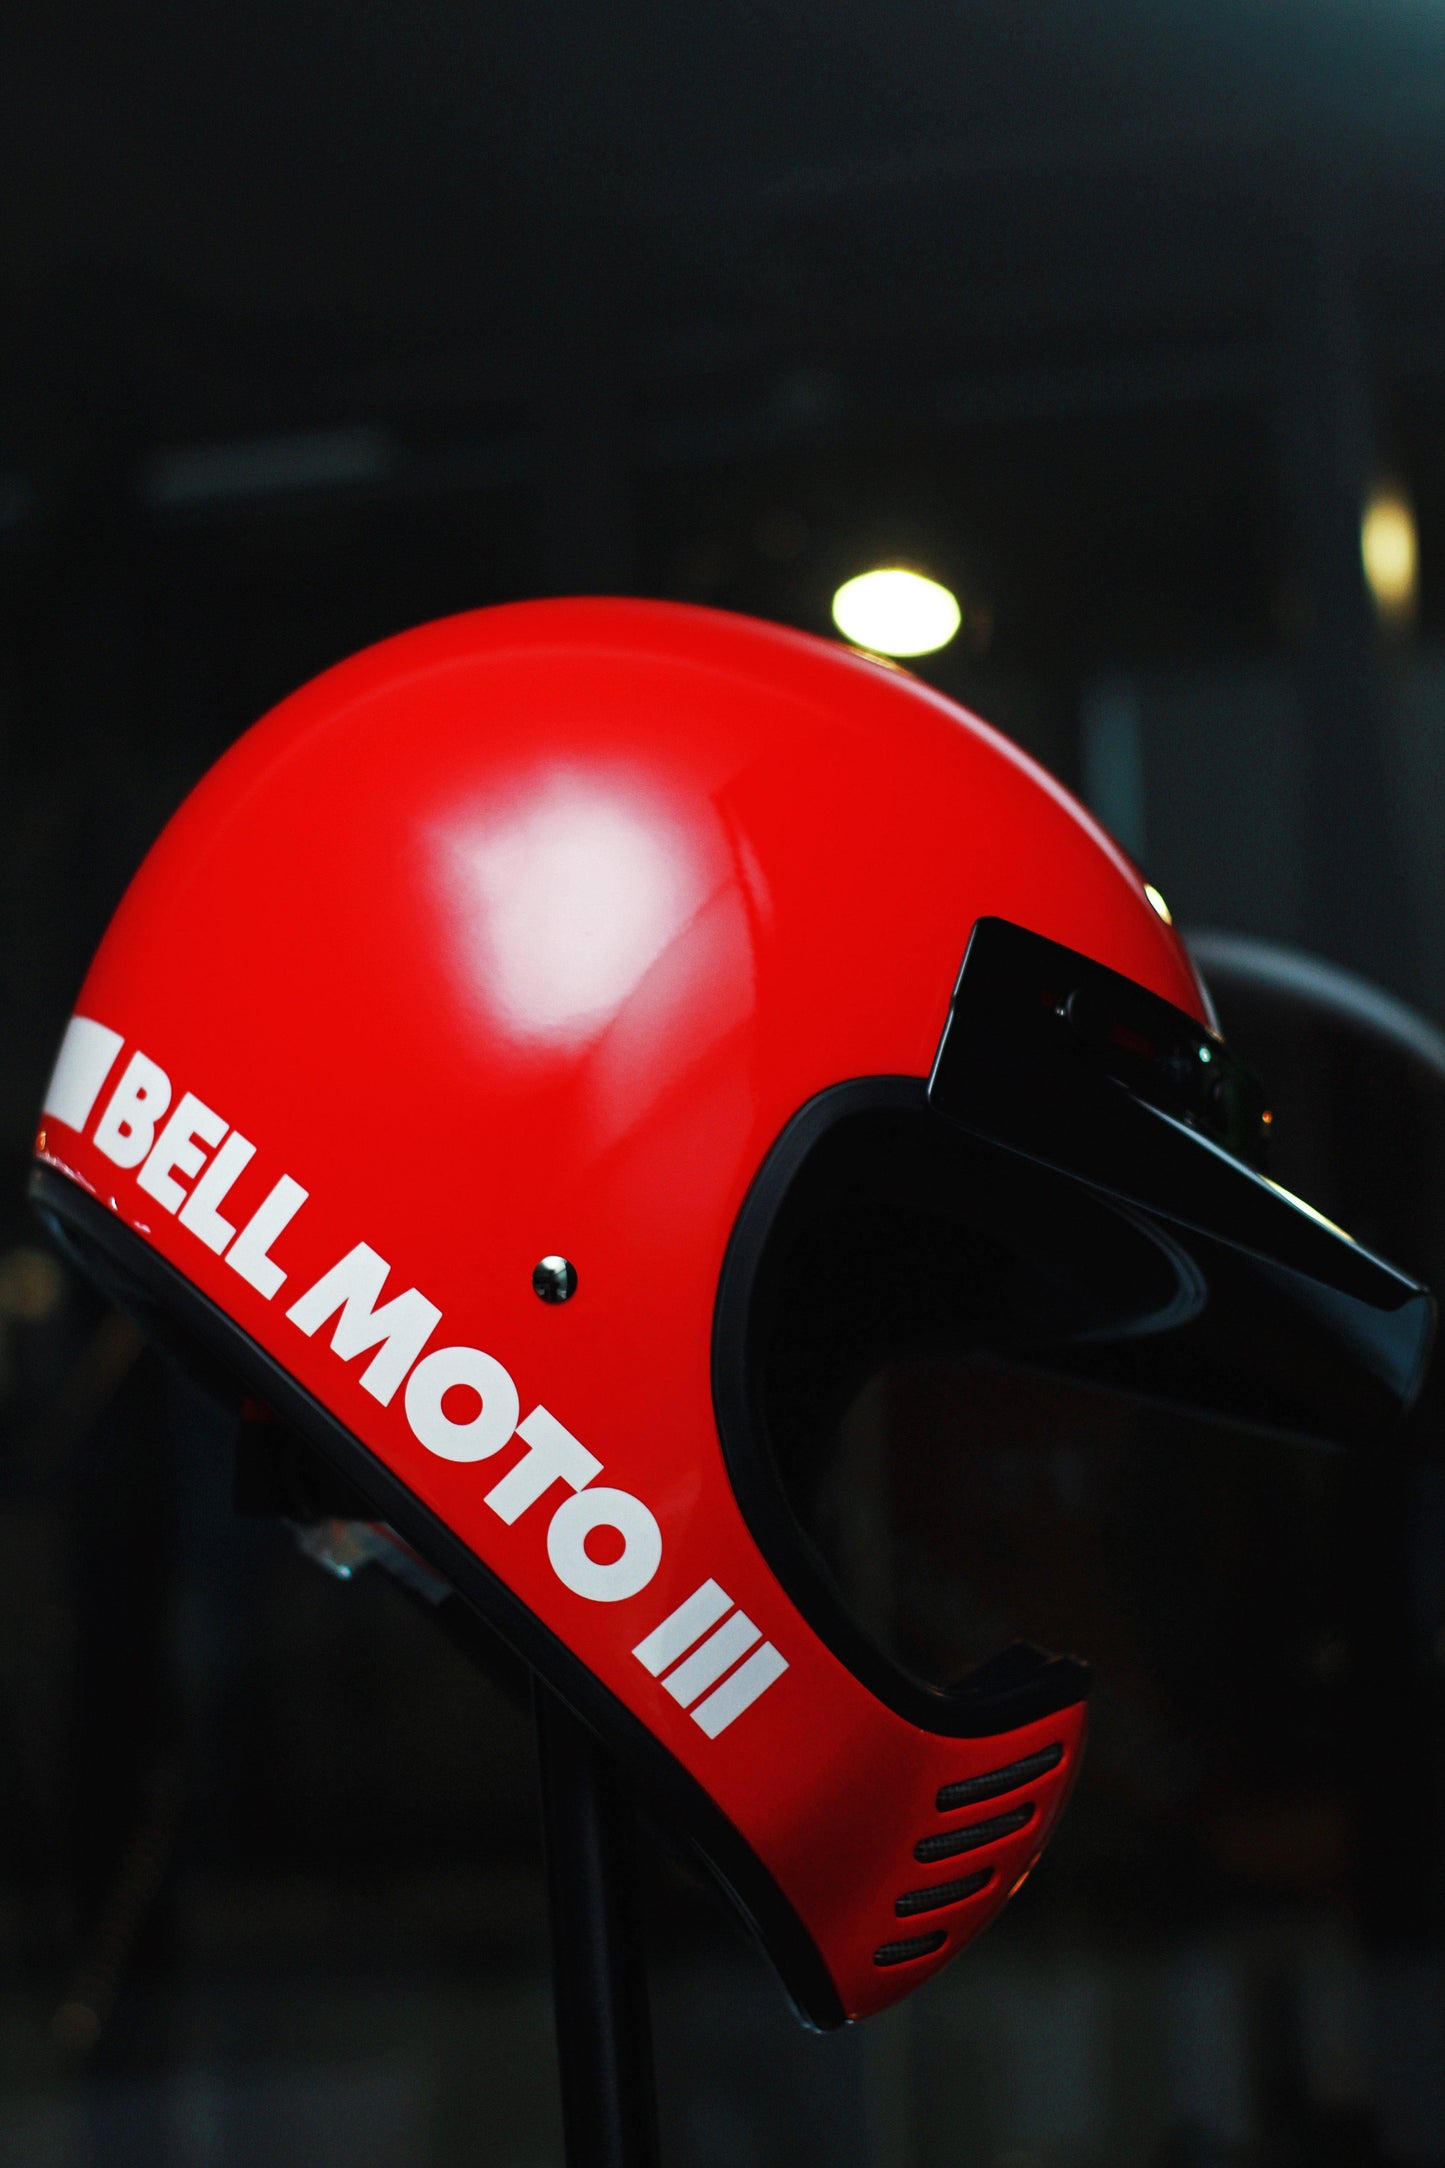 Bell Moto-3 (Classic Red) - Durian Bikers